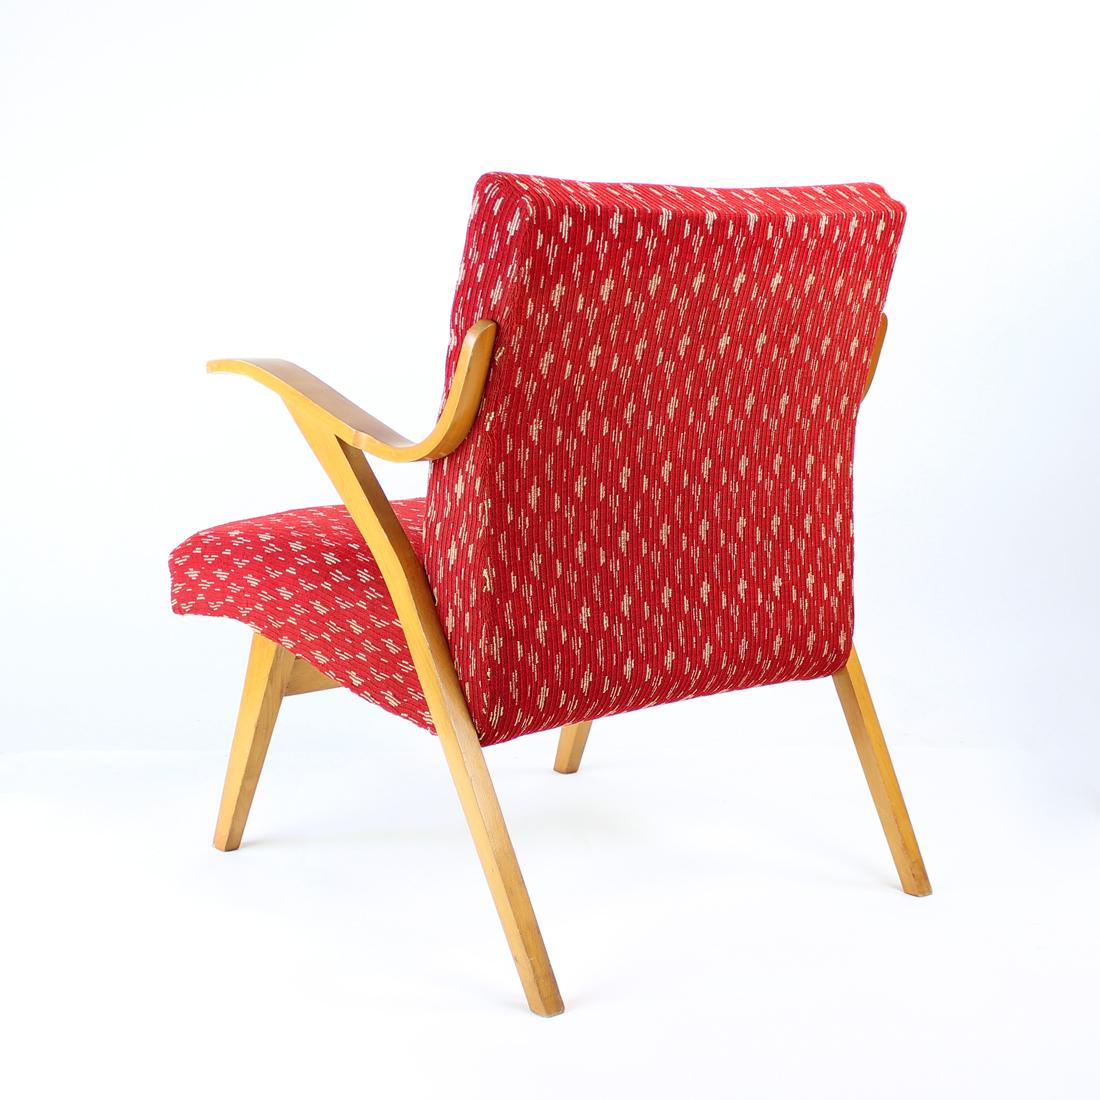 Mid-20th Century Midcentury Armchair in Original Red Fabric & Blonde Wood, Czechoslovakia, 1960s For Sale